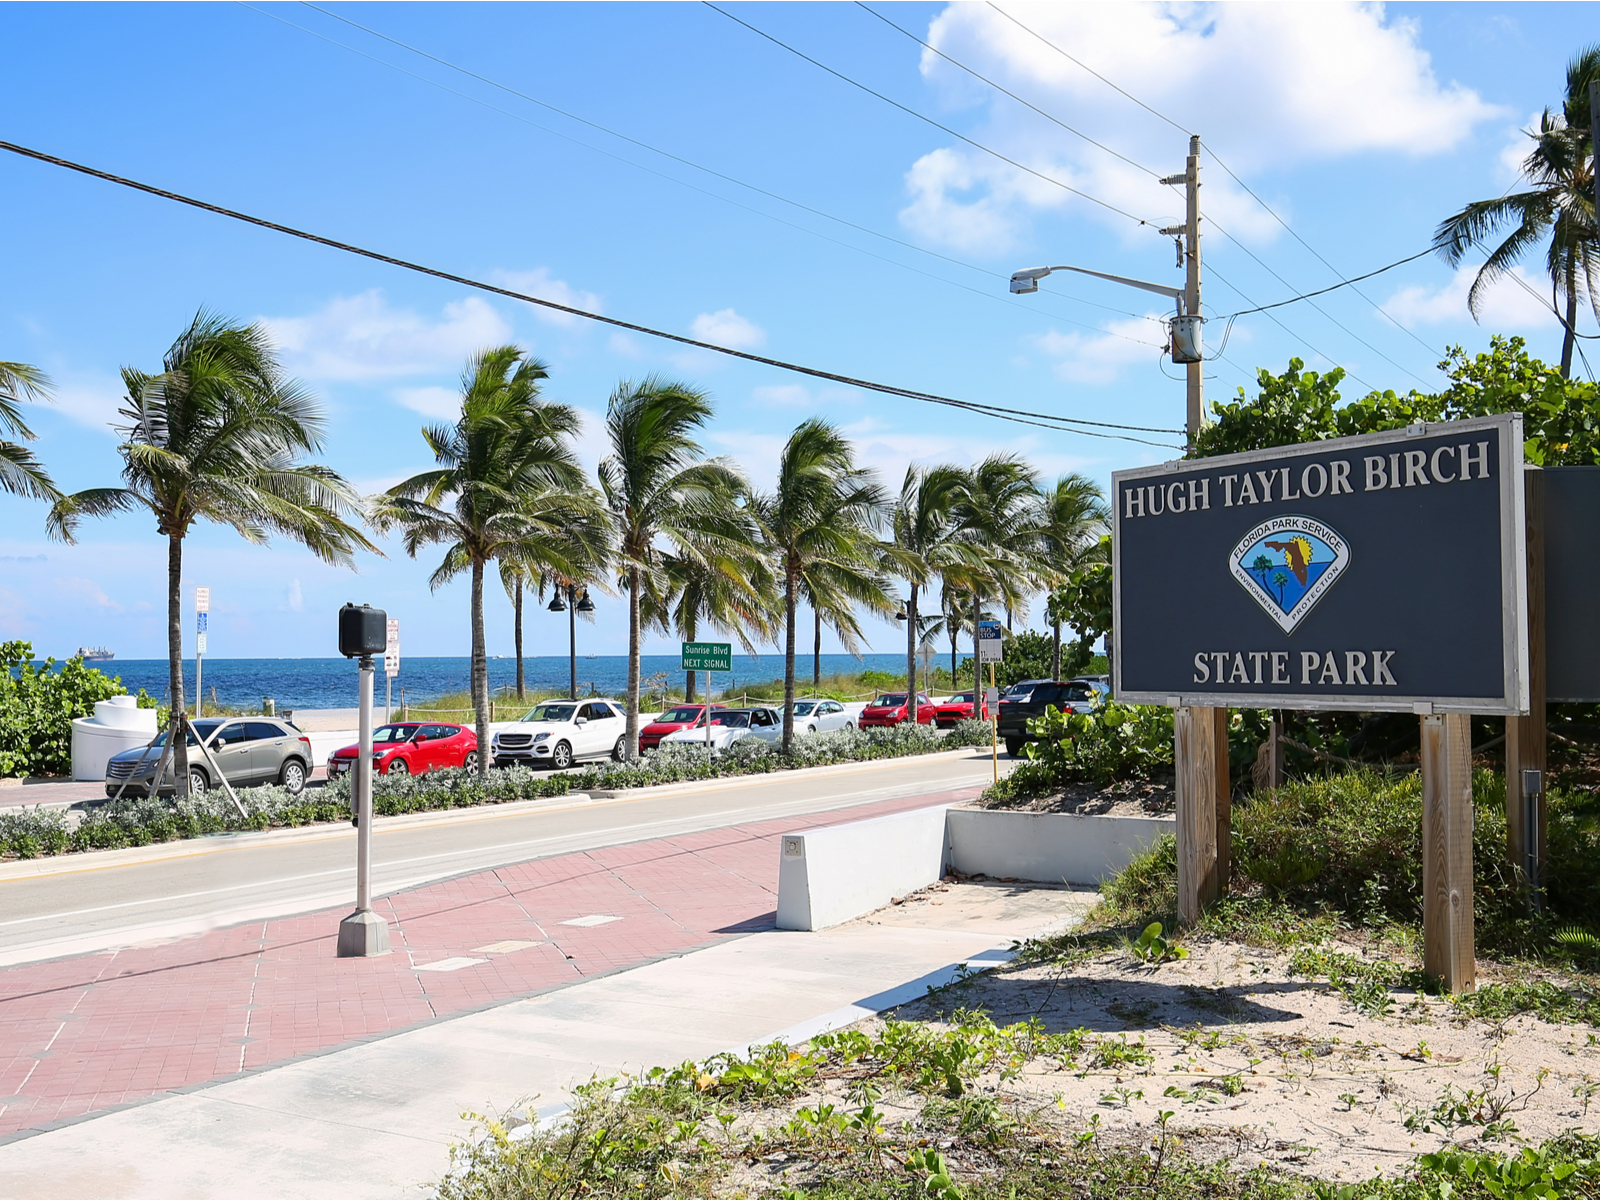 Wind gently blowing on palm trees of Hugh Taylor Birch State Park which is one of the best things to do in Fort Lauderdale, with huge signage and several parked cars